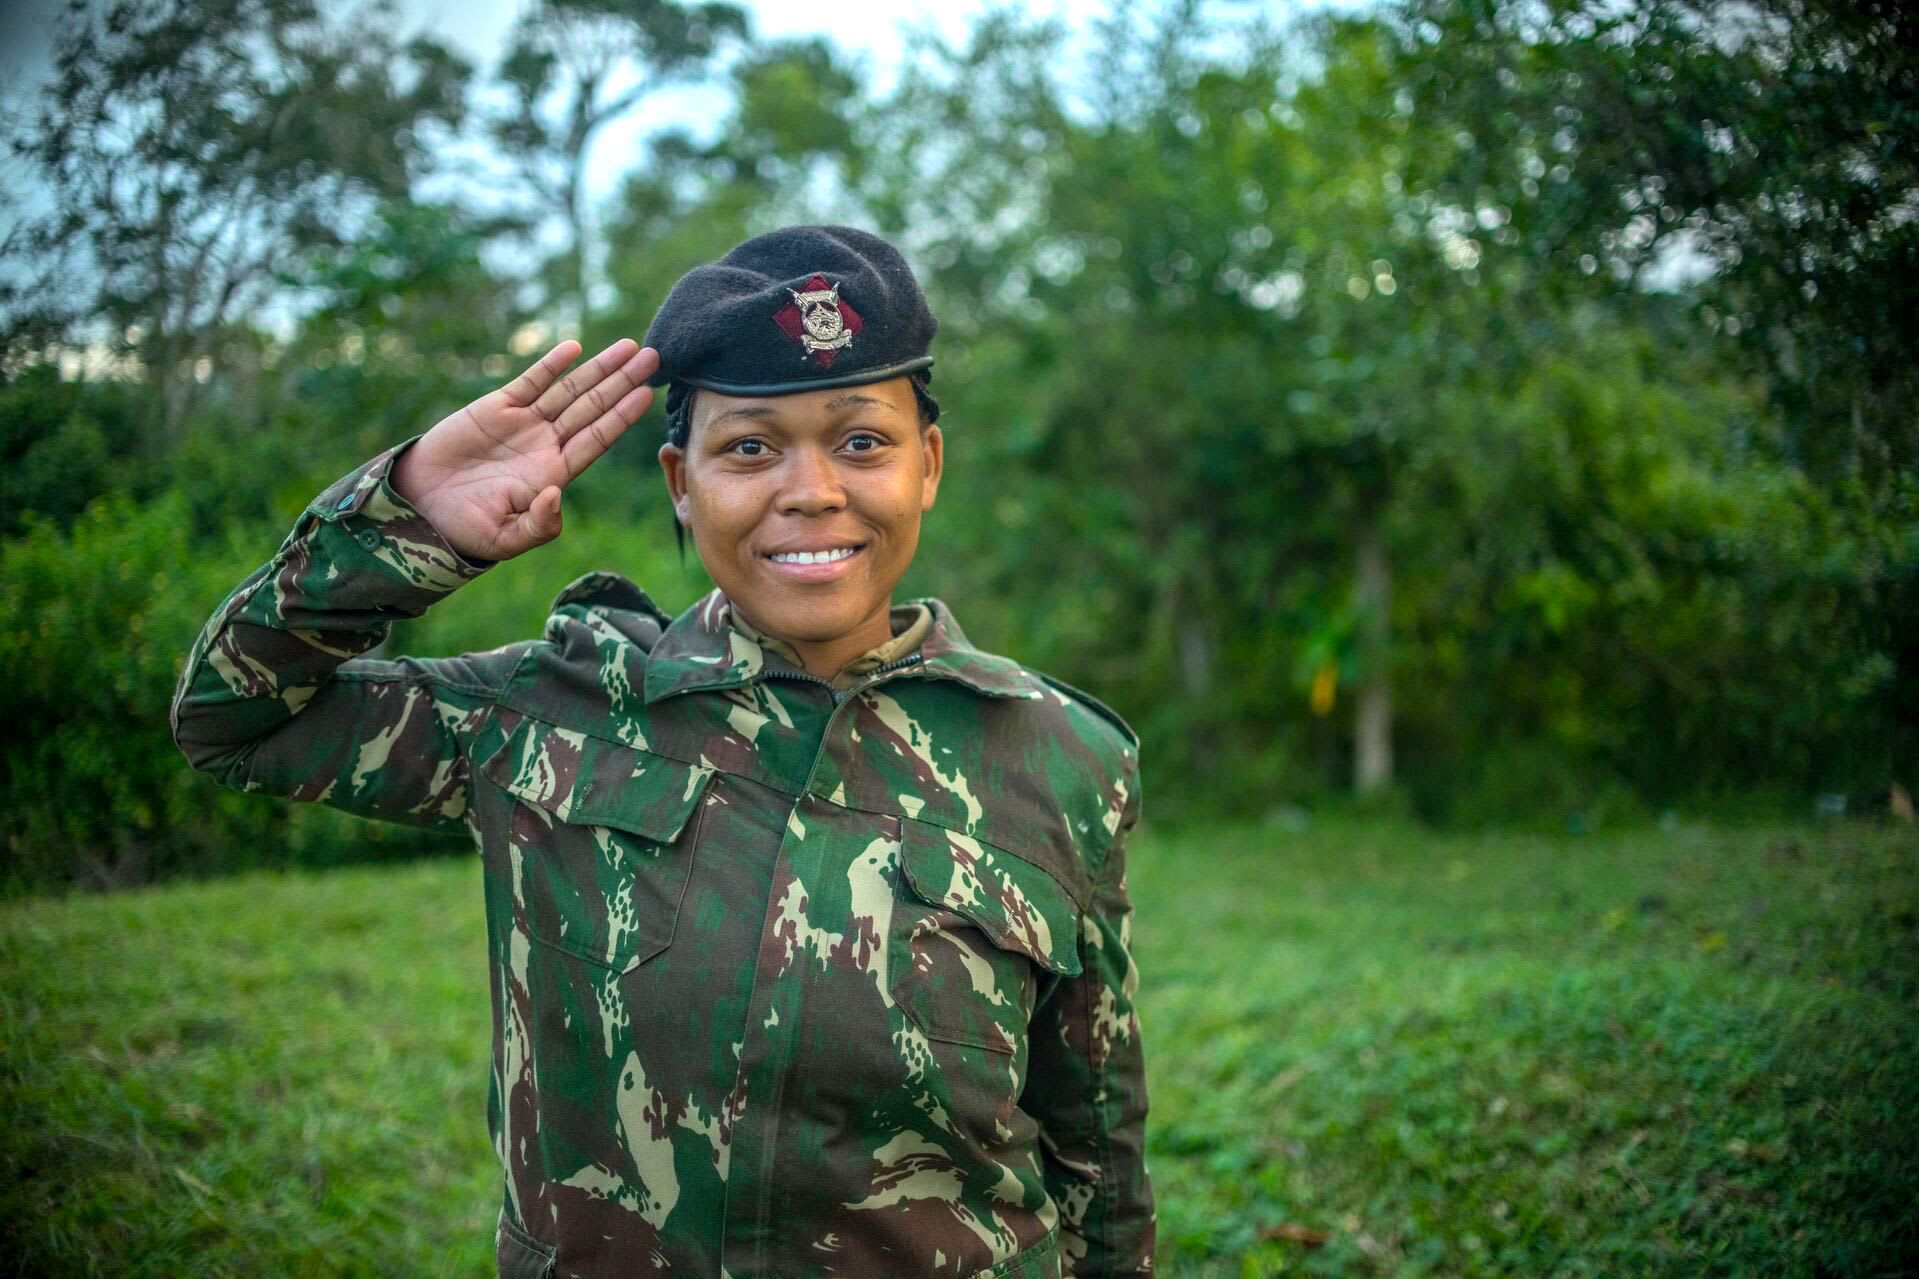 Miriam is pictured here in her uniform - a camoflauge top and green pants. She is wearing a hat. She is smilimg at the camera and saluting, and there are trees in the background.